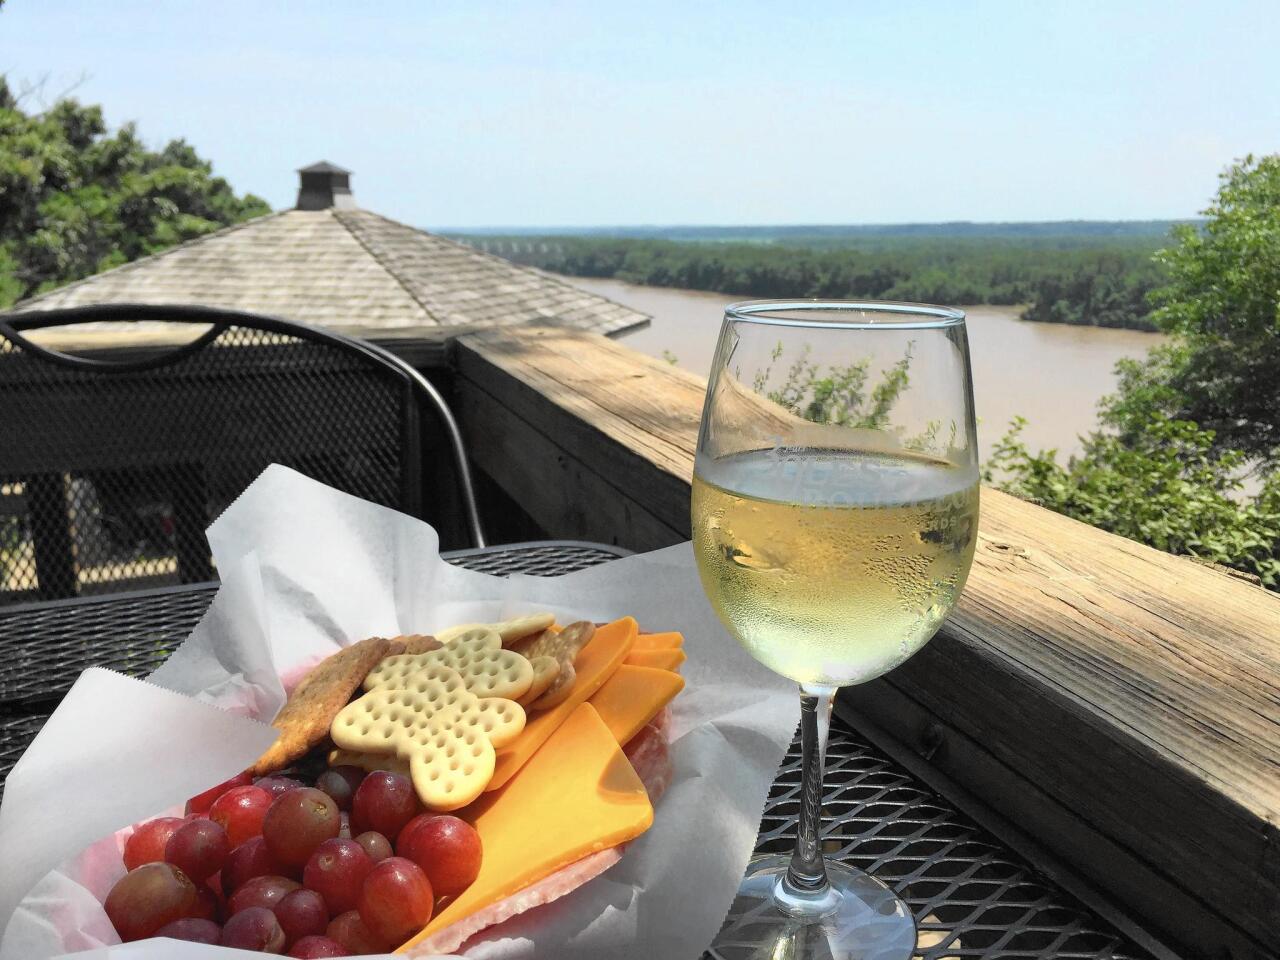 A midday snack at Les Bourgeois Vineyards’ A-Frame, a popular spot to picnic in Rocheport, Mo.